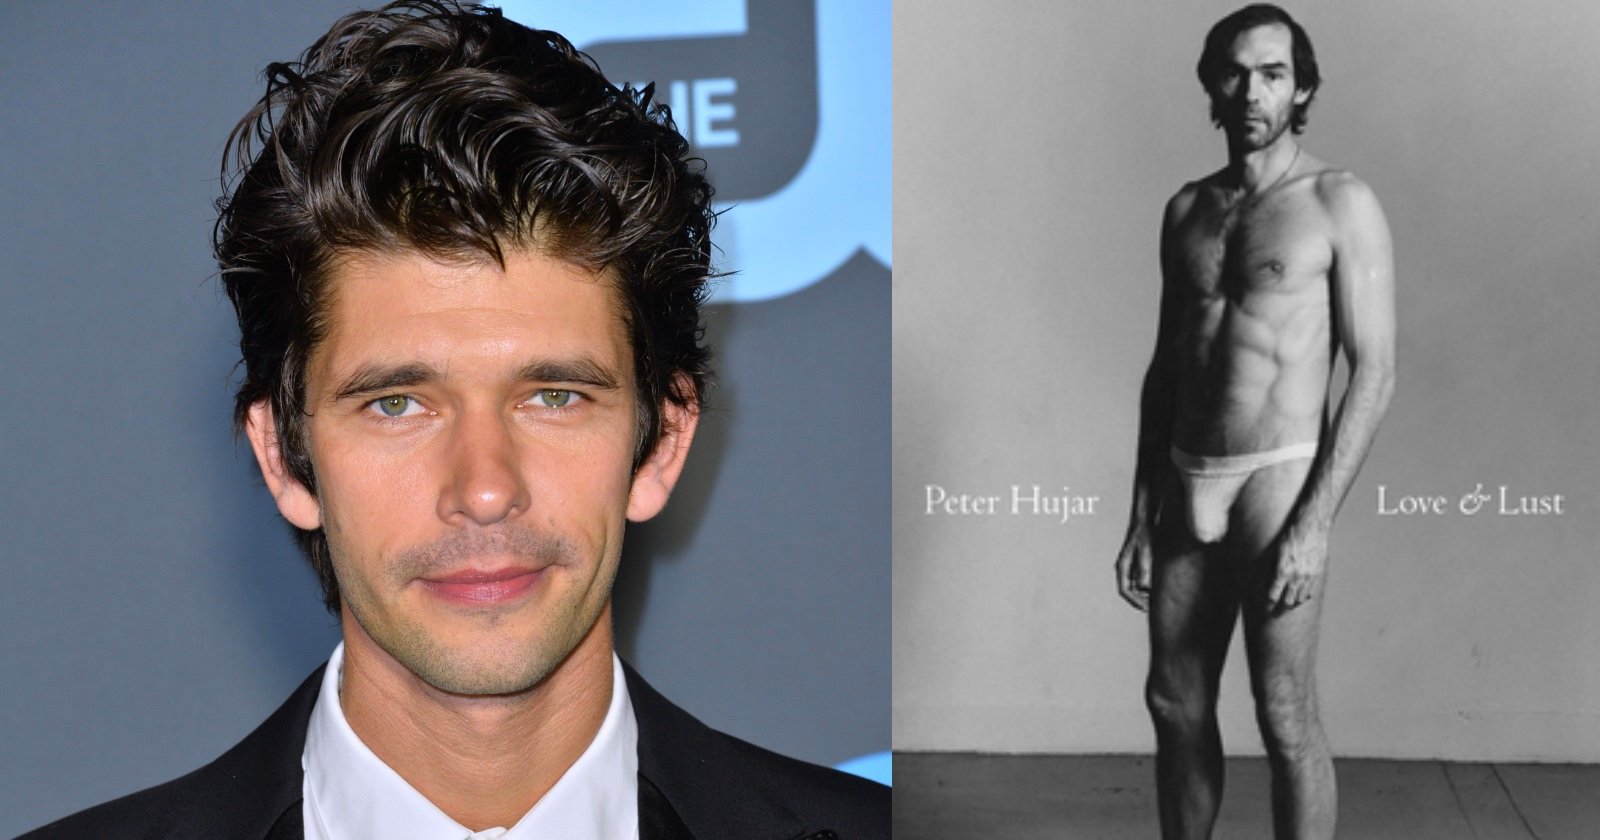 Ben Whishaw Cast as Acclaimed Photographer Peter Hujar in Upcoming Biopic